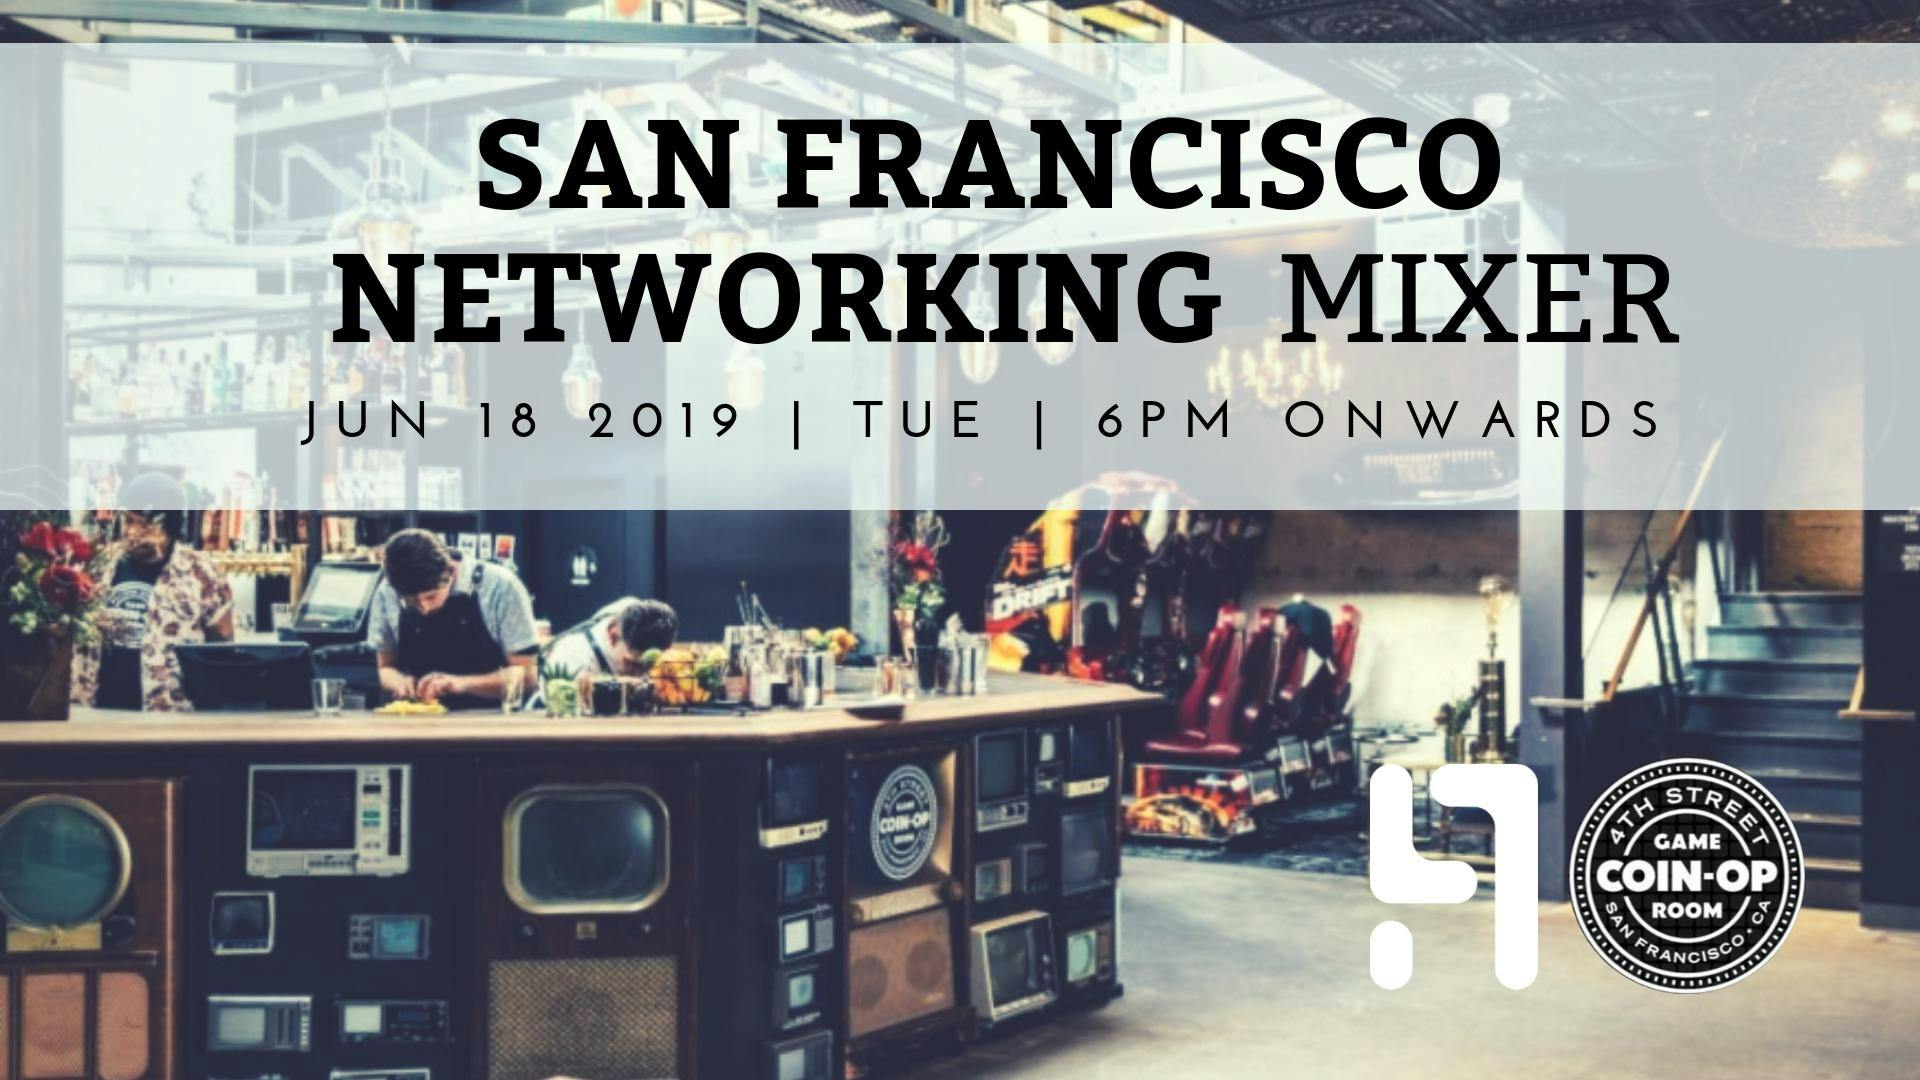 San Francisco Networking Mixer At The Coin Op In San